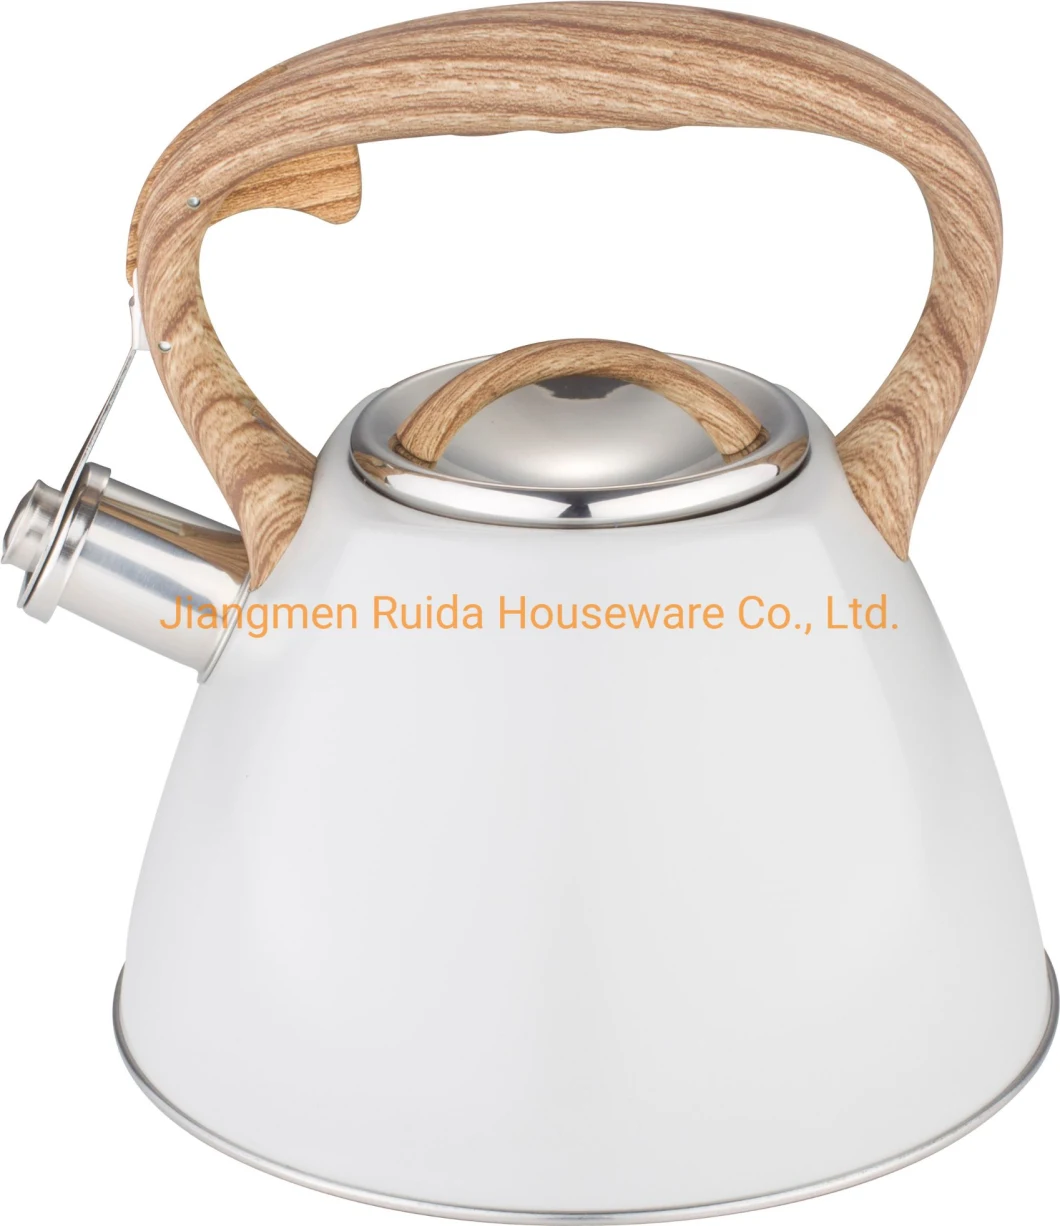 3 Litre Color Painting Stainless Steel Whistling Coffee Tea Water Kettle with Heat Resistant Handle